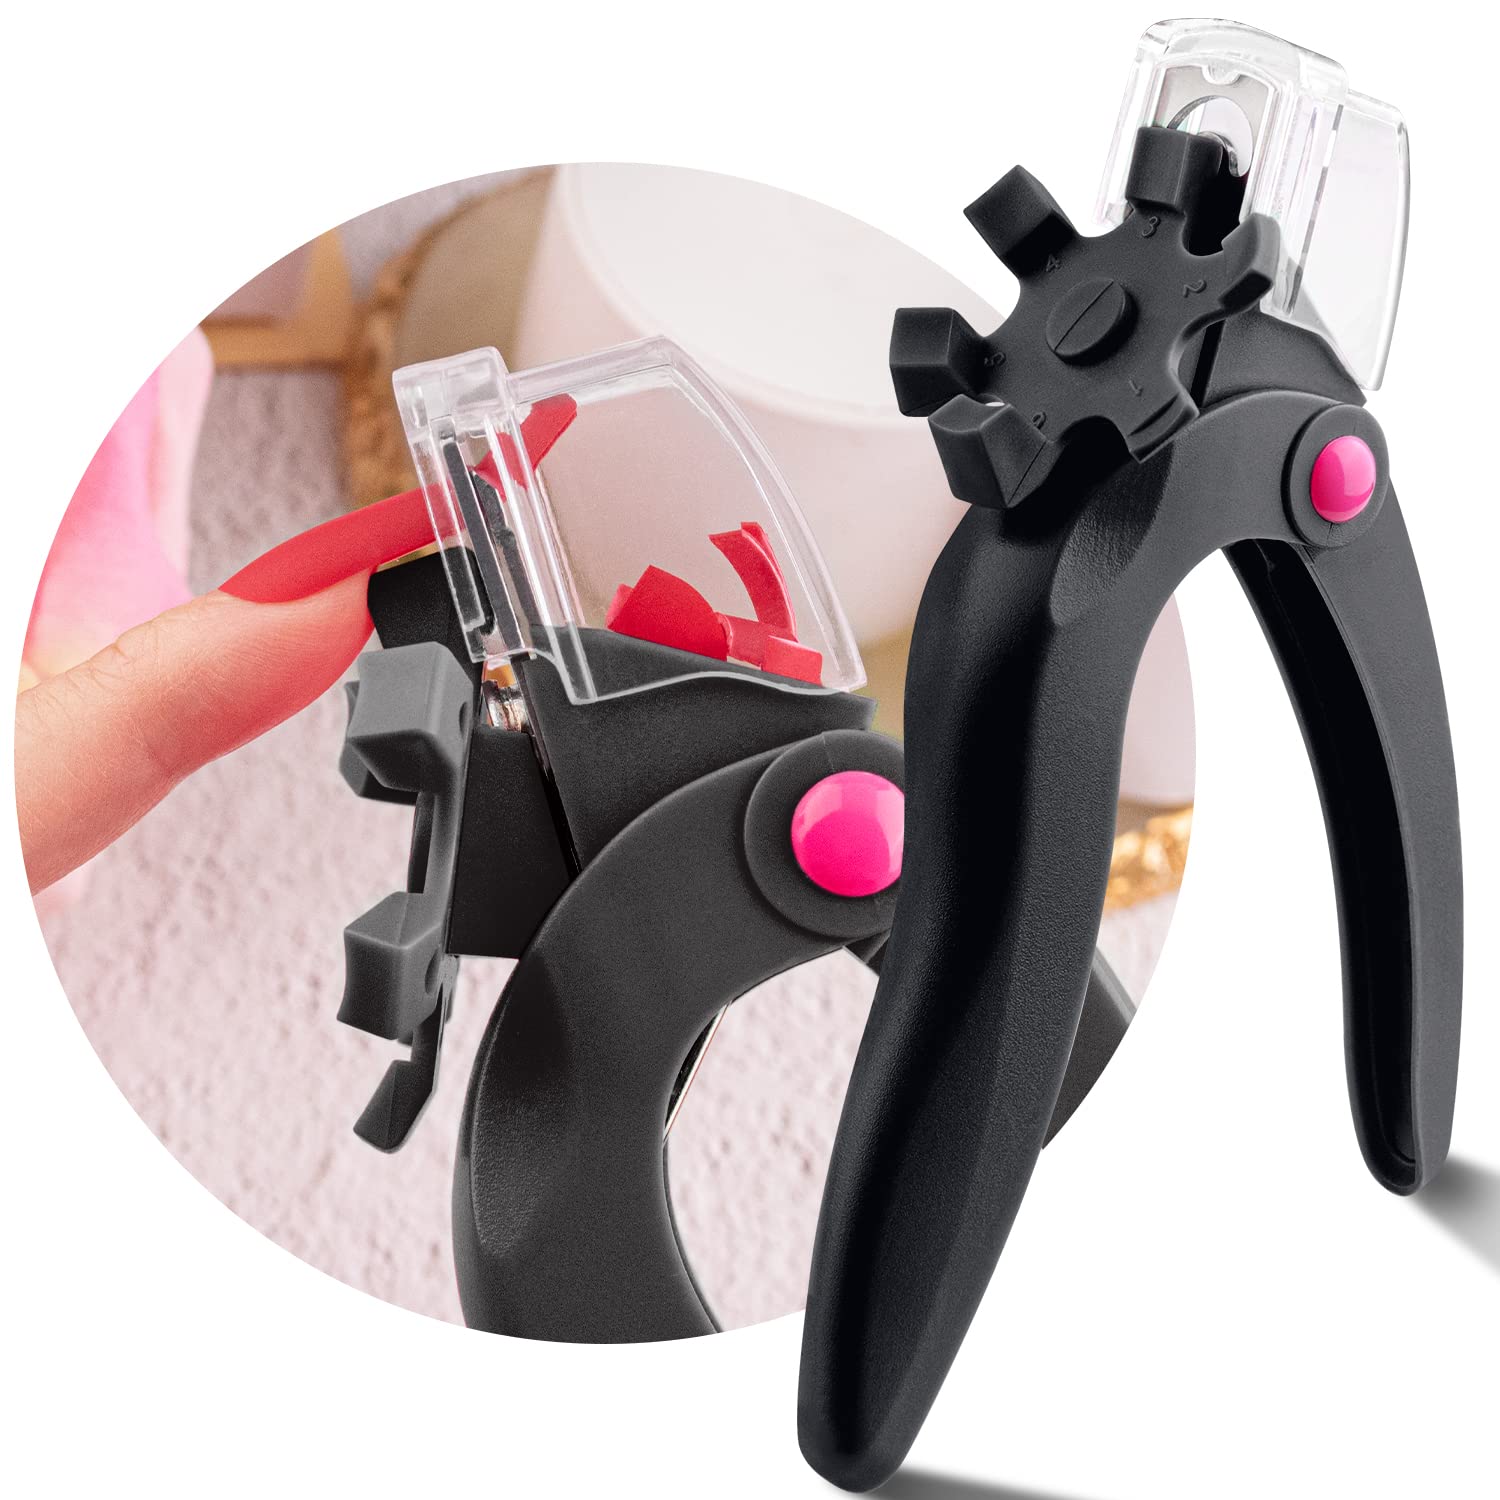 Buy Gofypel Nail Clipper Acrylic Nail Cutter Stainless Steel Nail Tips with  1 Nail Polish Carving Pen for Gel False Nails Trimmer Nail Art Manicure  Tools Online at Low Prices in India -